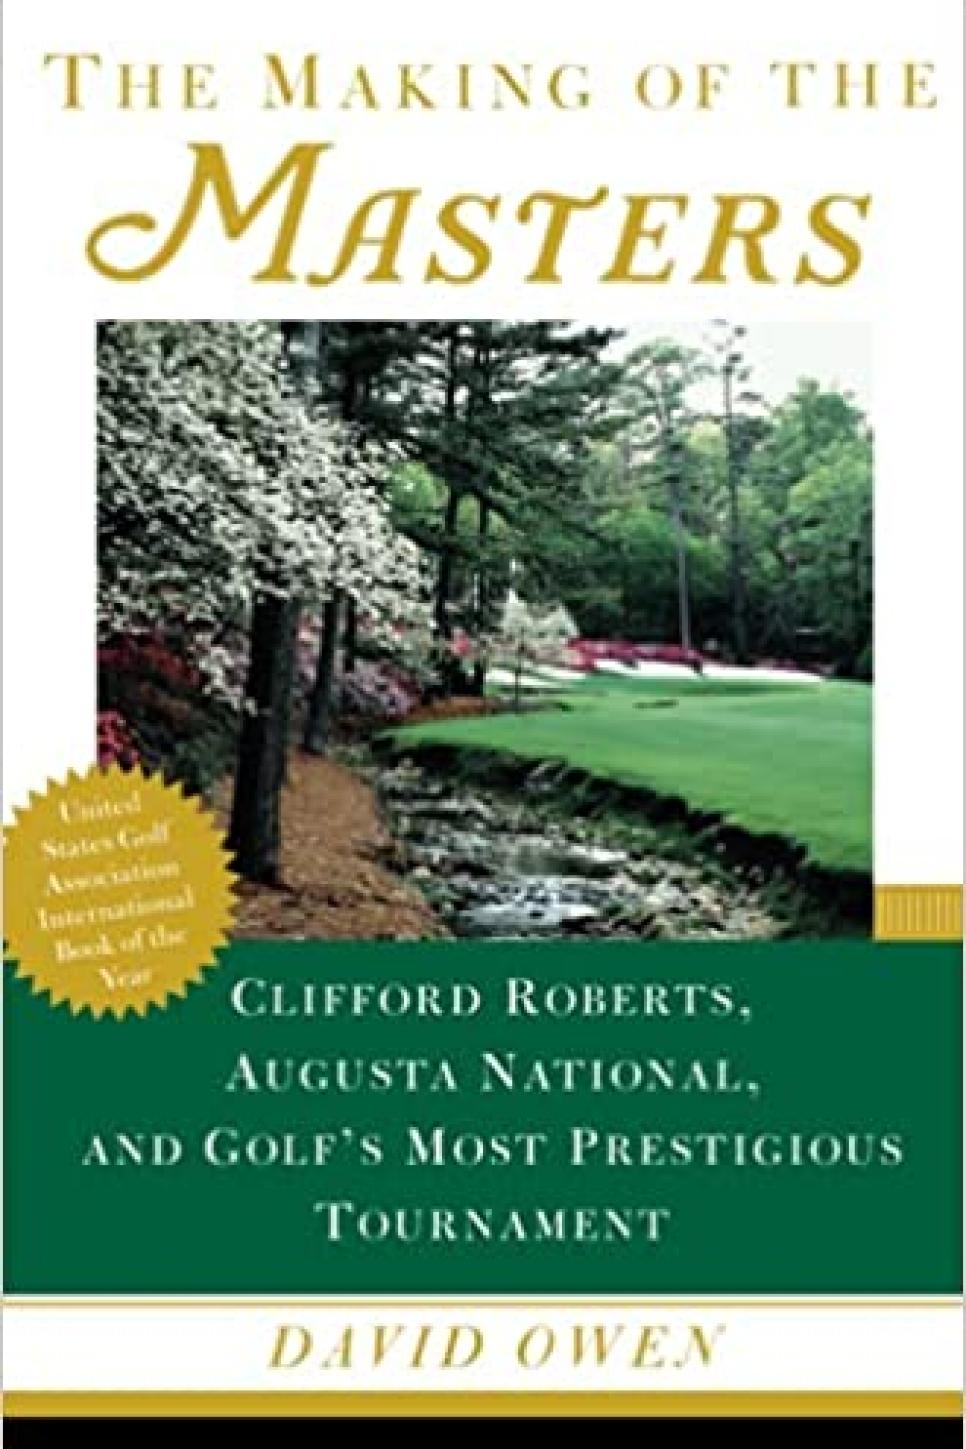 The Making of the Masters By David Owen (1999)